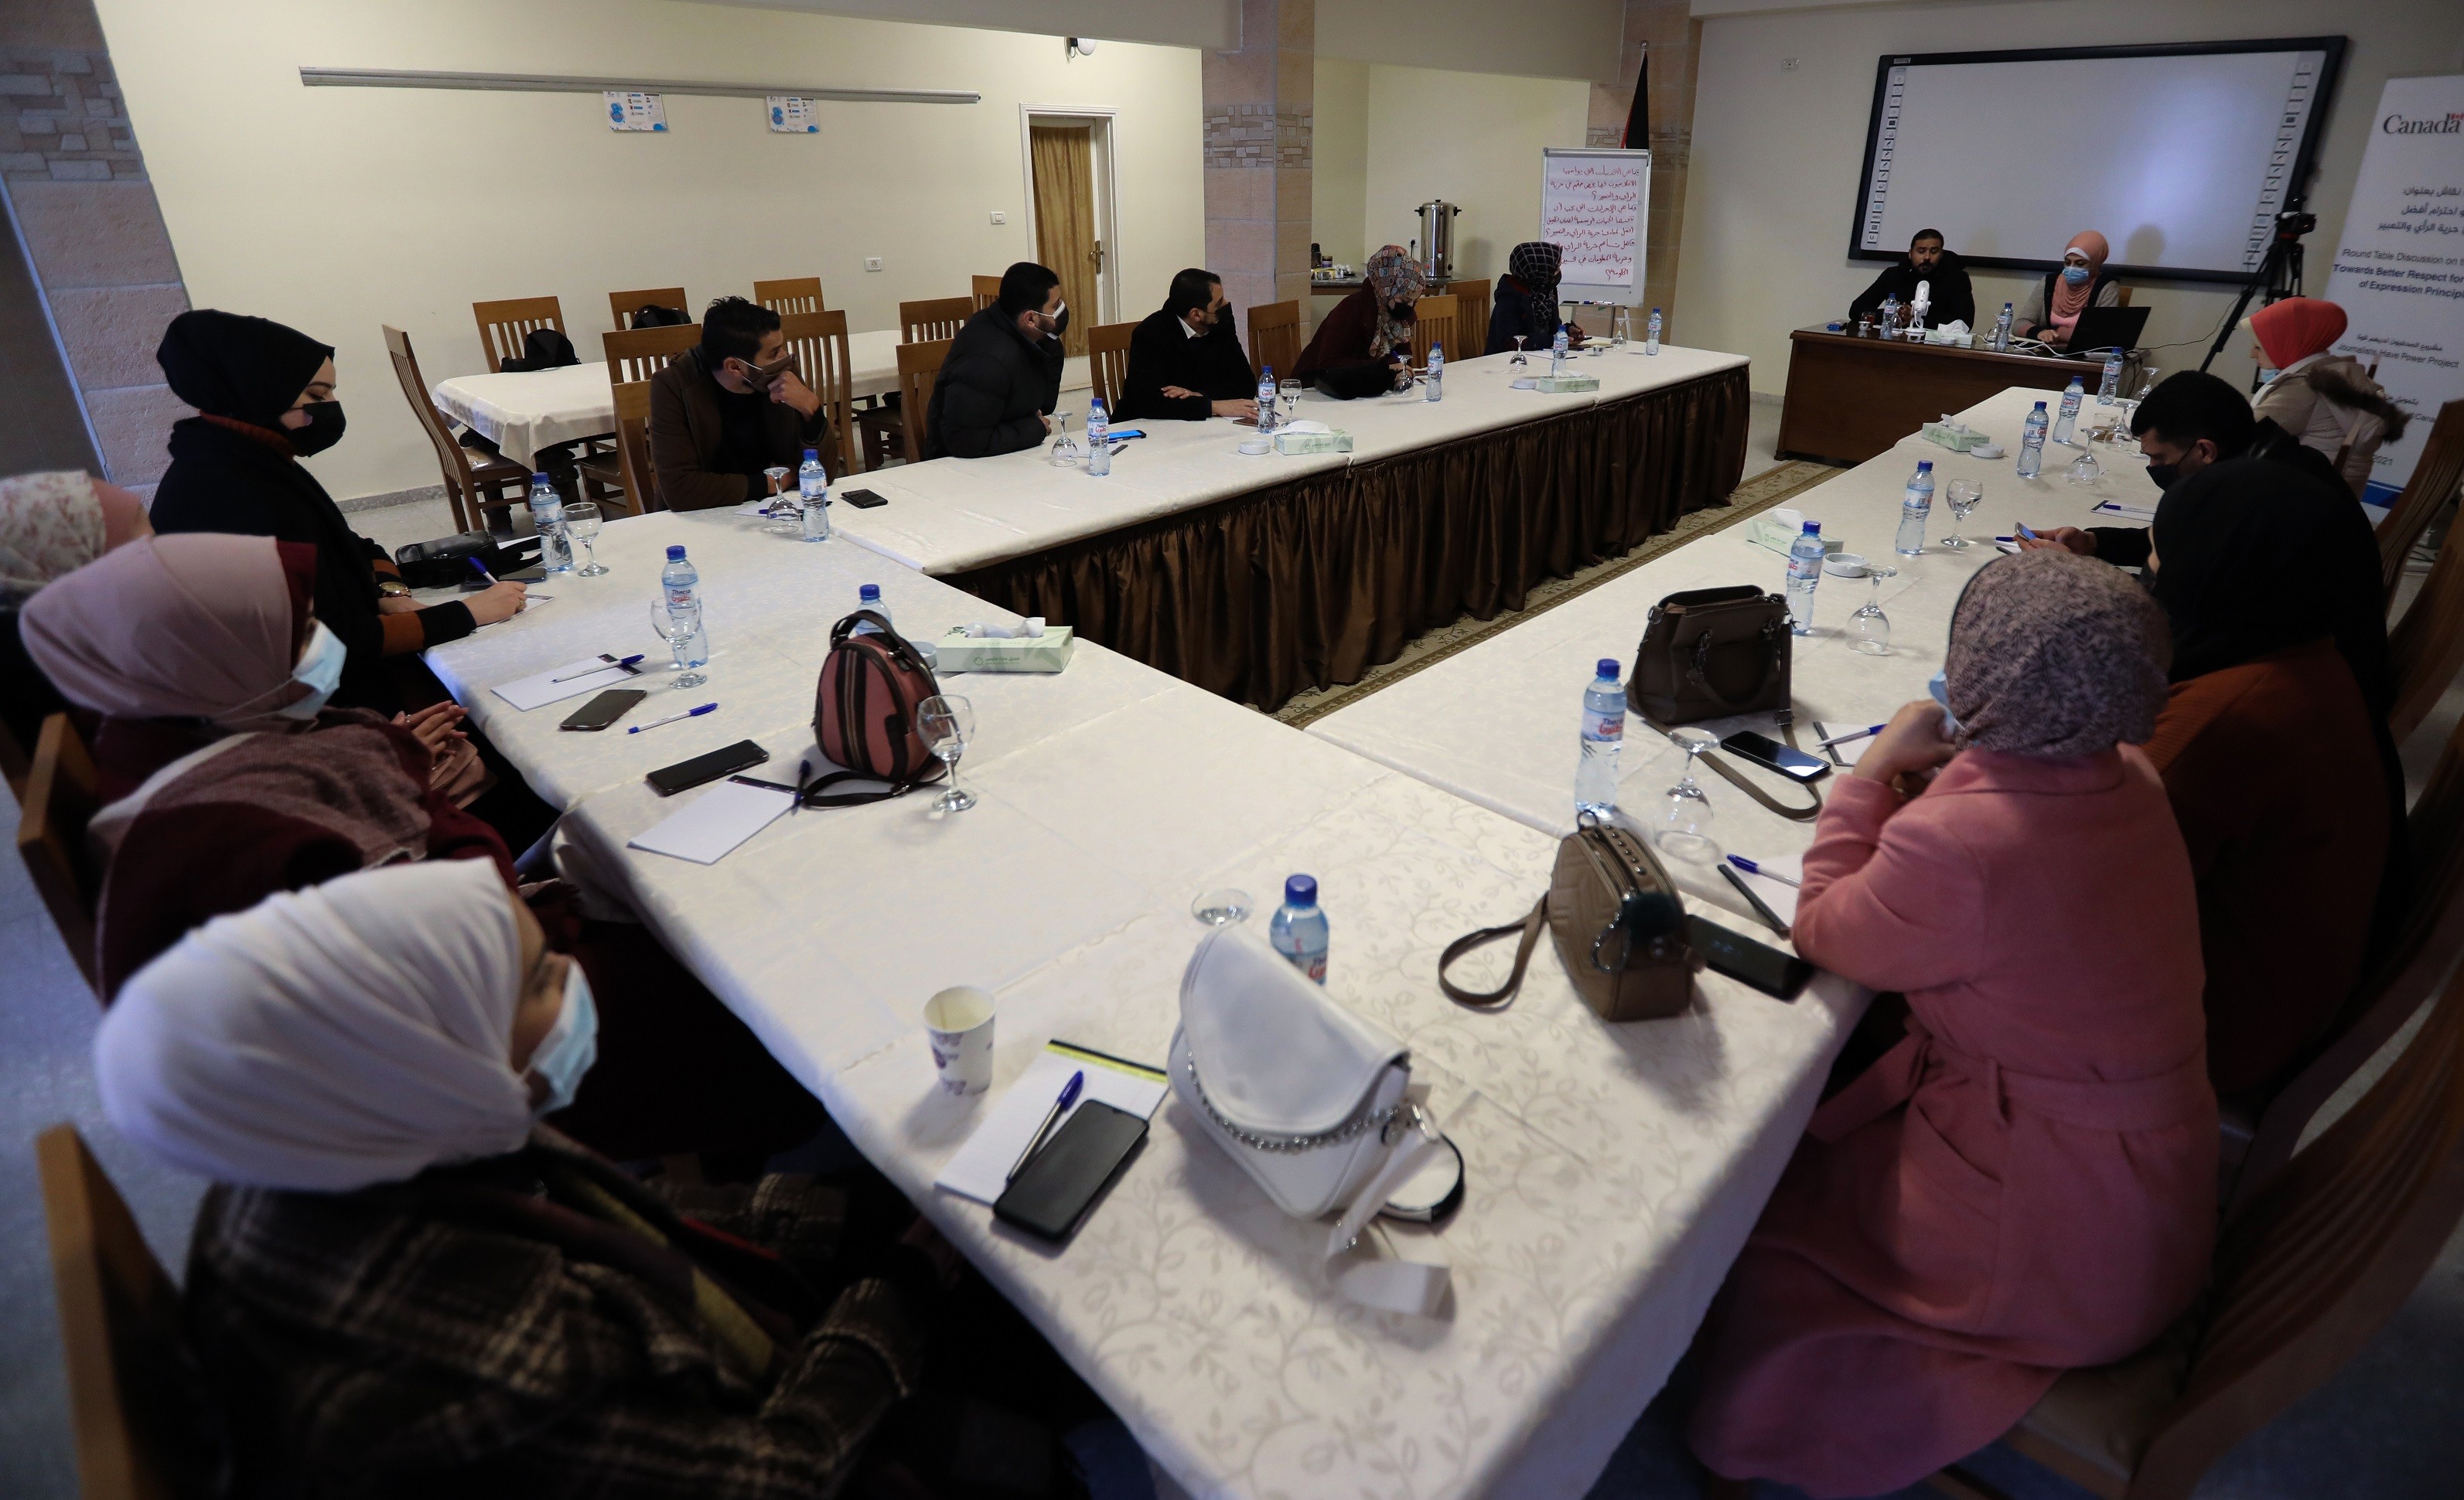 Press House organizes a round table discussion on the topic of “Towards Better Respect for Freedom of Expression Principles”